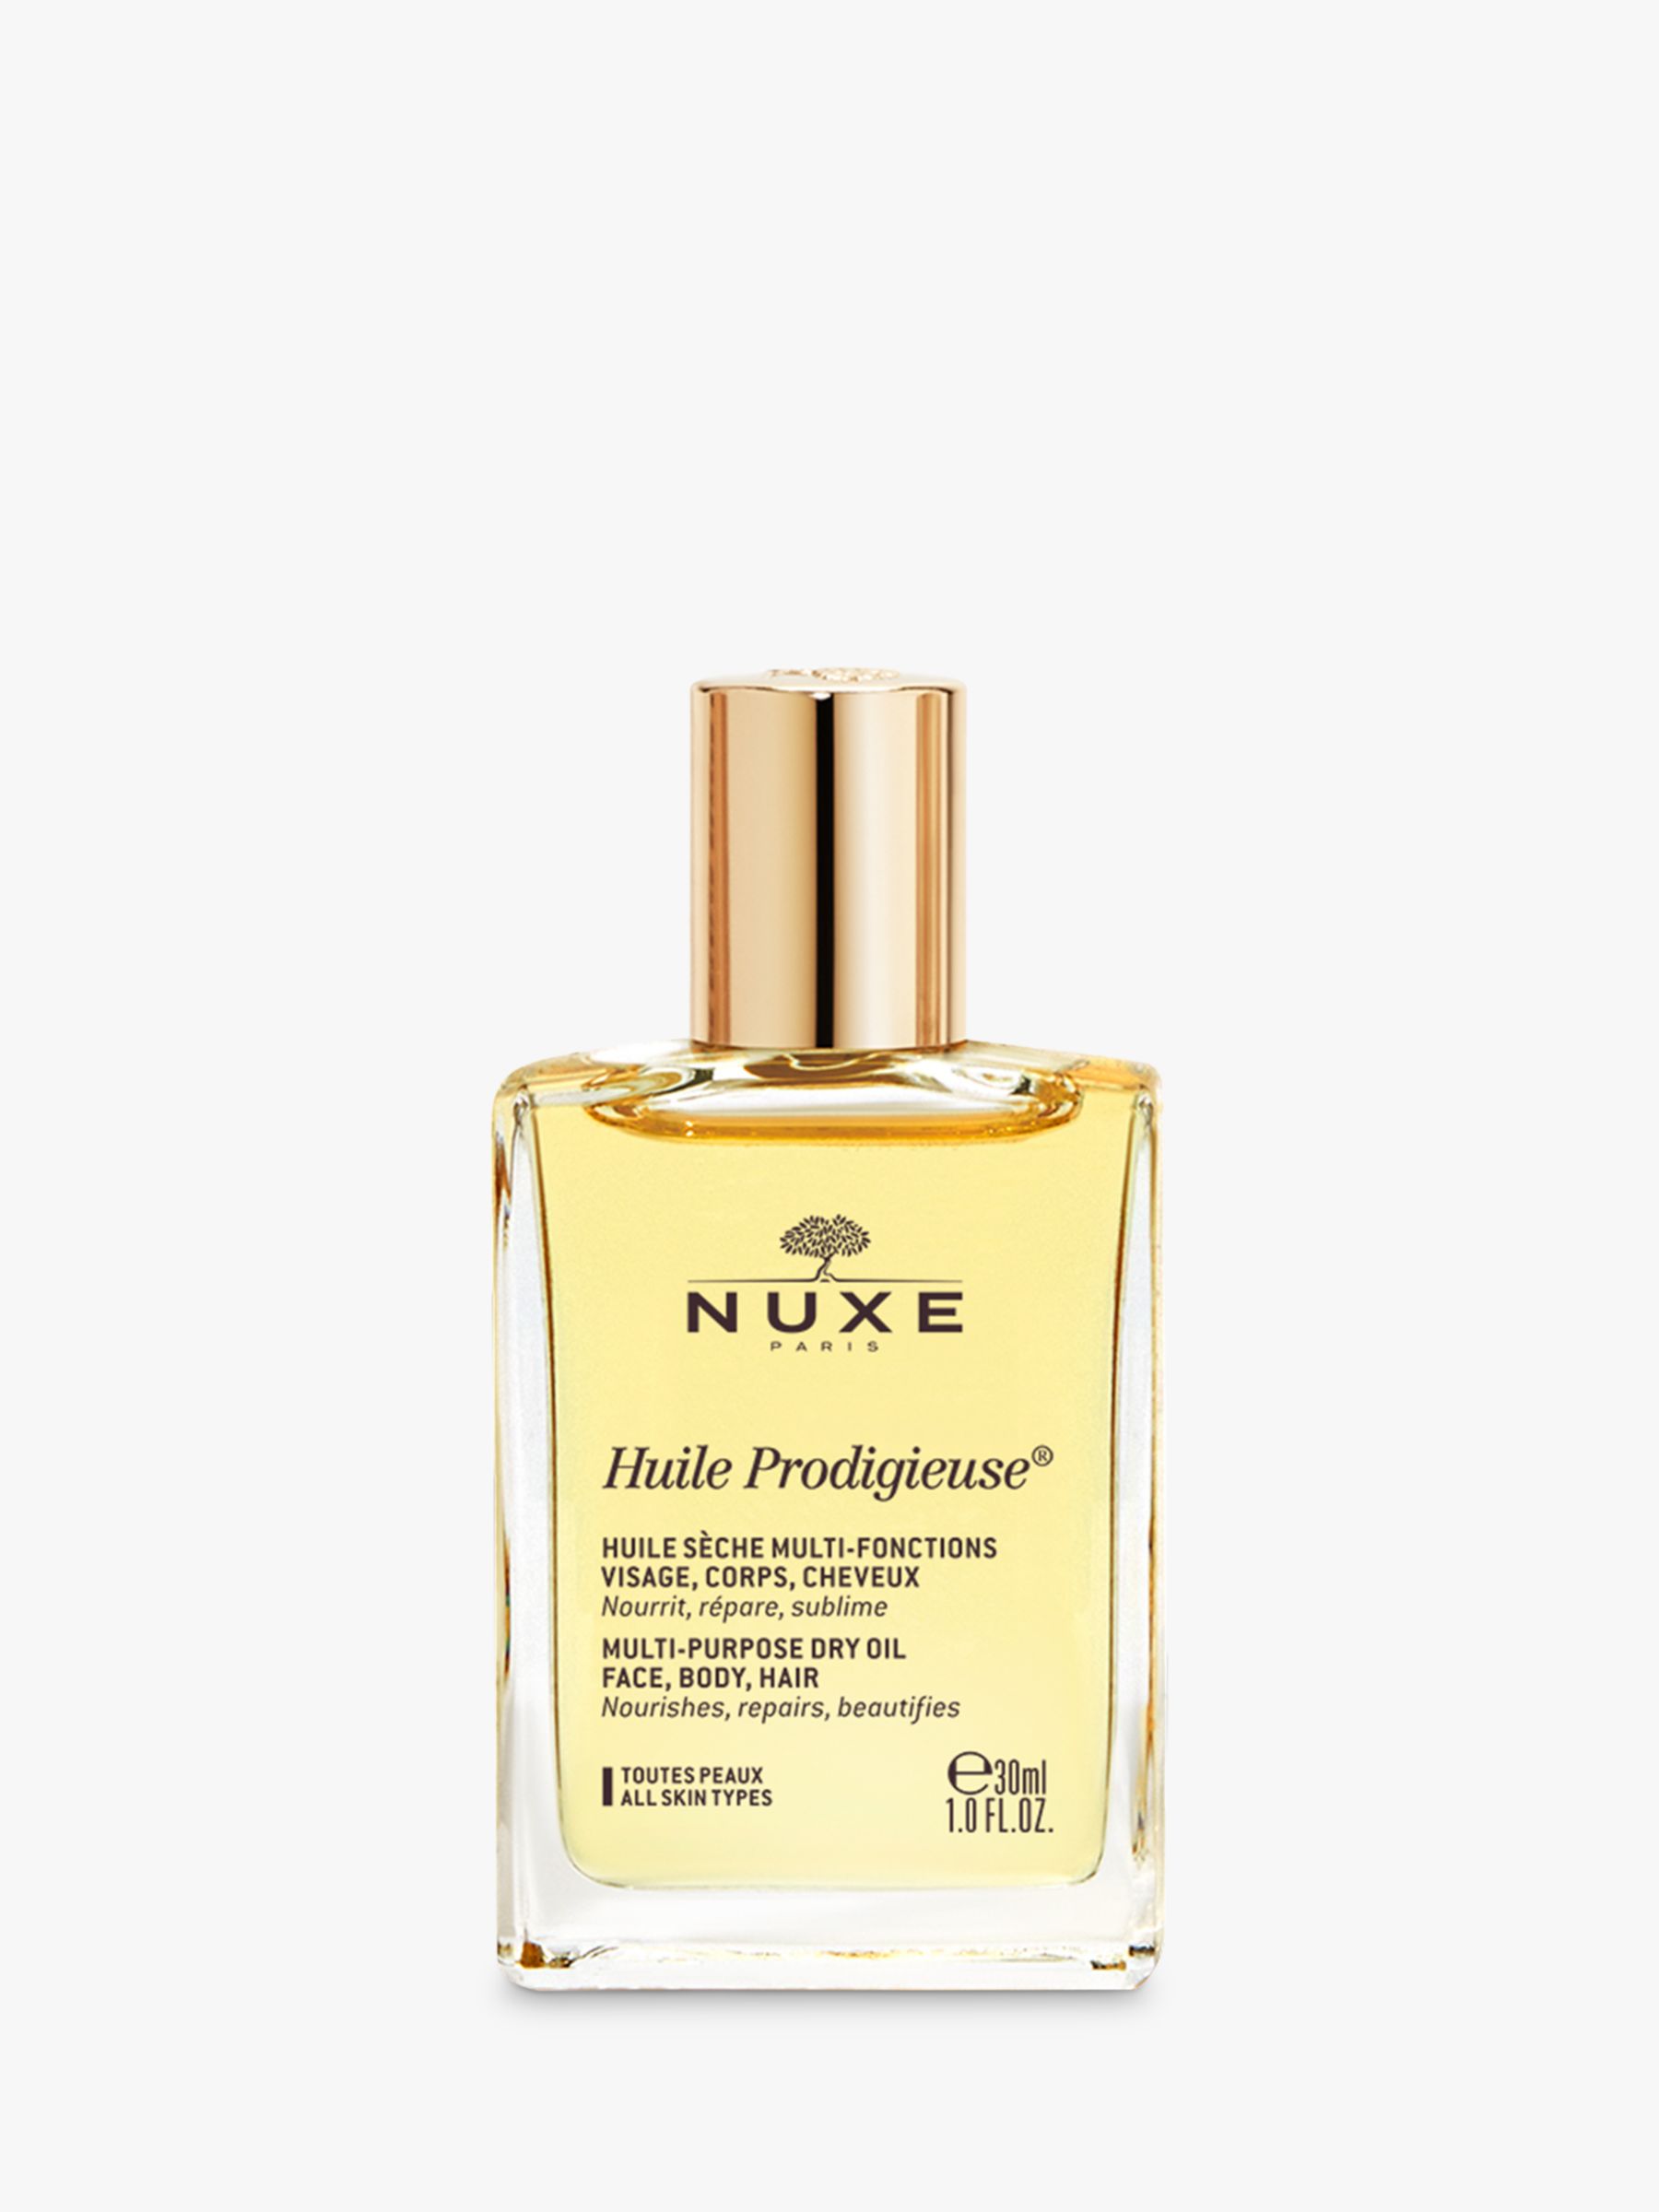 NUXE Huile Prodigieuse® Multi-Purpose Dry Oil for Face, Body and Hair